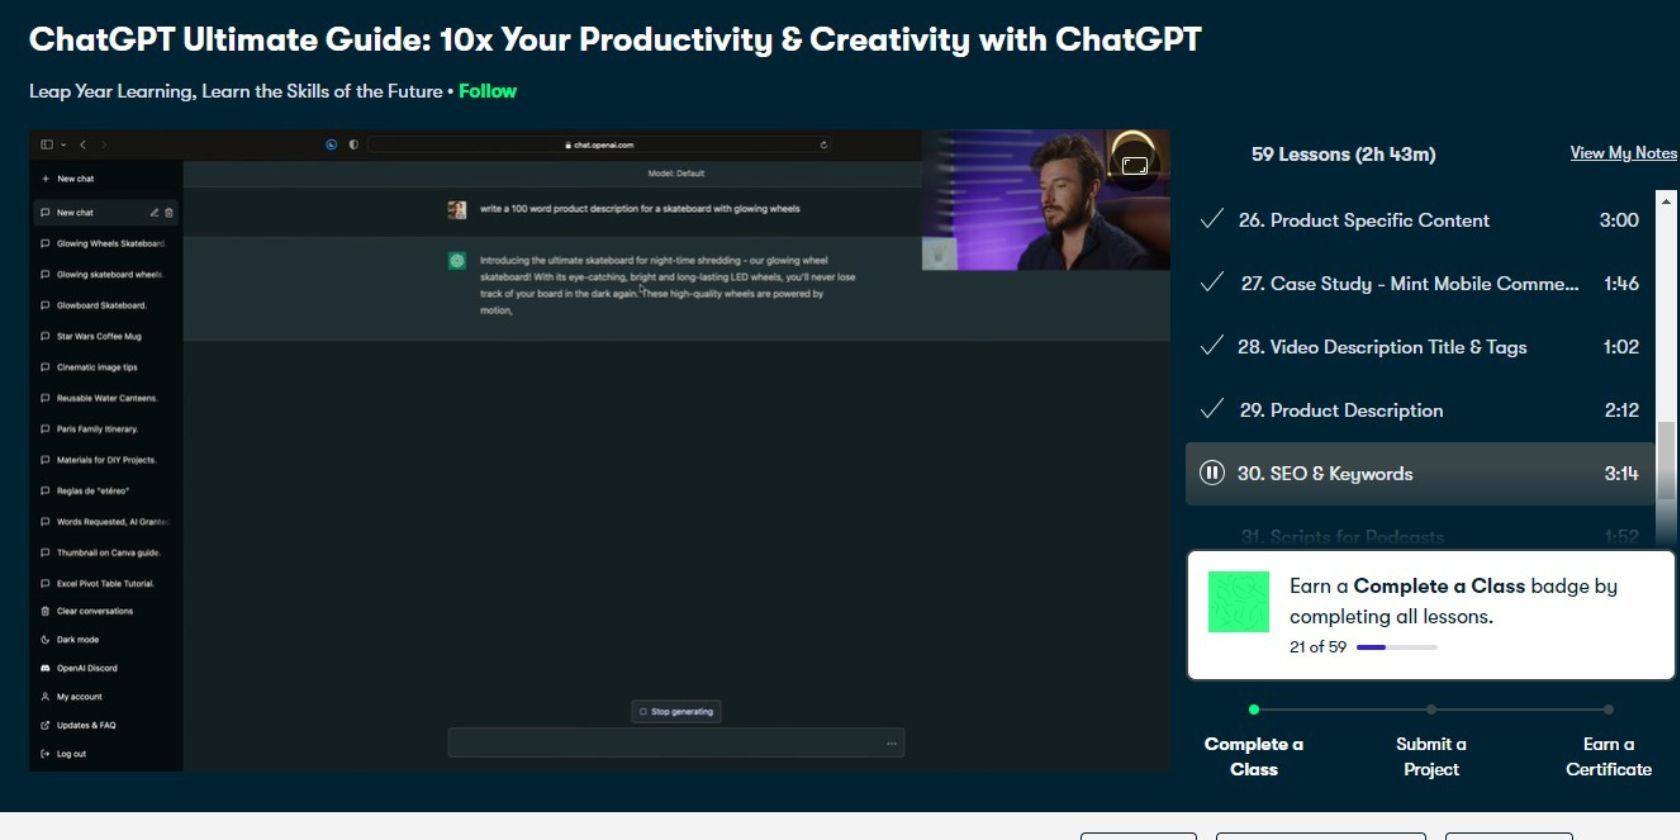 screenshot of ChatGPT Ultimate Guide 10x Your Productivity & Creativity with ChatGPT on Skillshare learning platform